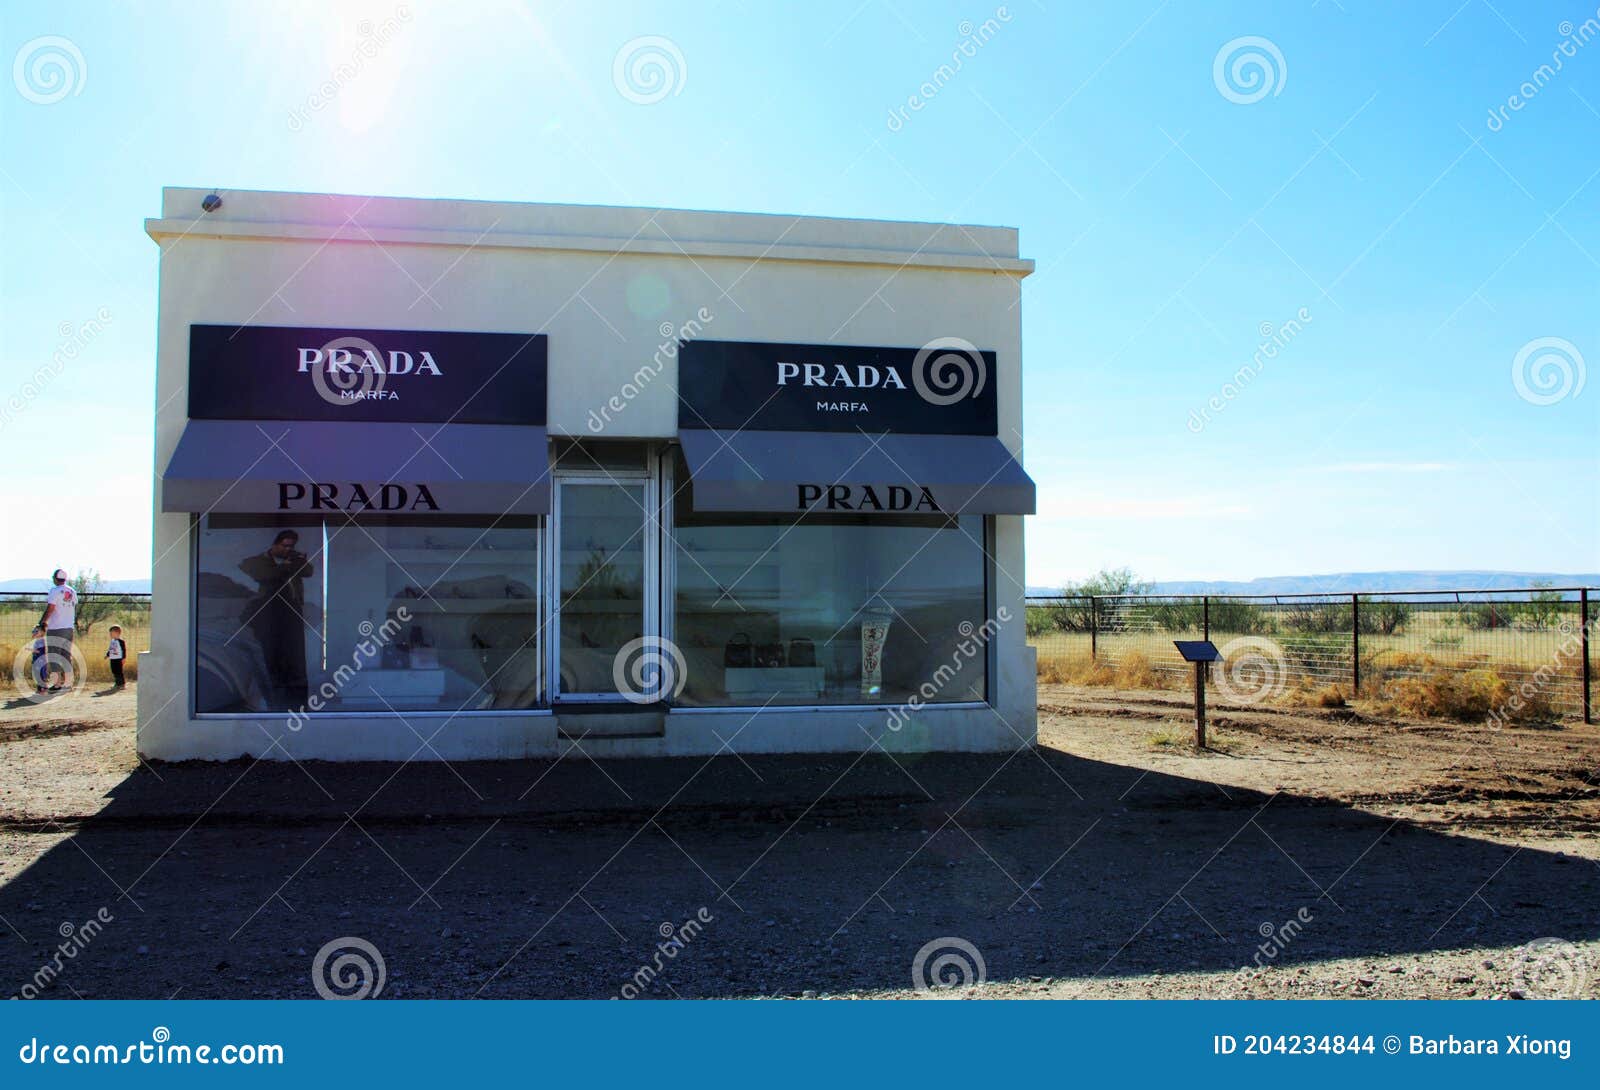 The Prada Marfa Store Sits Alone in the Middle of the Desert Under Sunshine  Editorial Stock Image - Image of alone, texas: 204234844